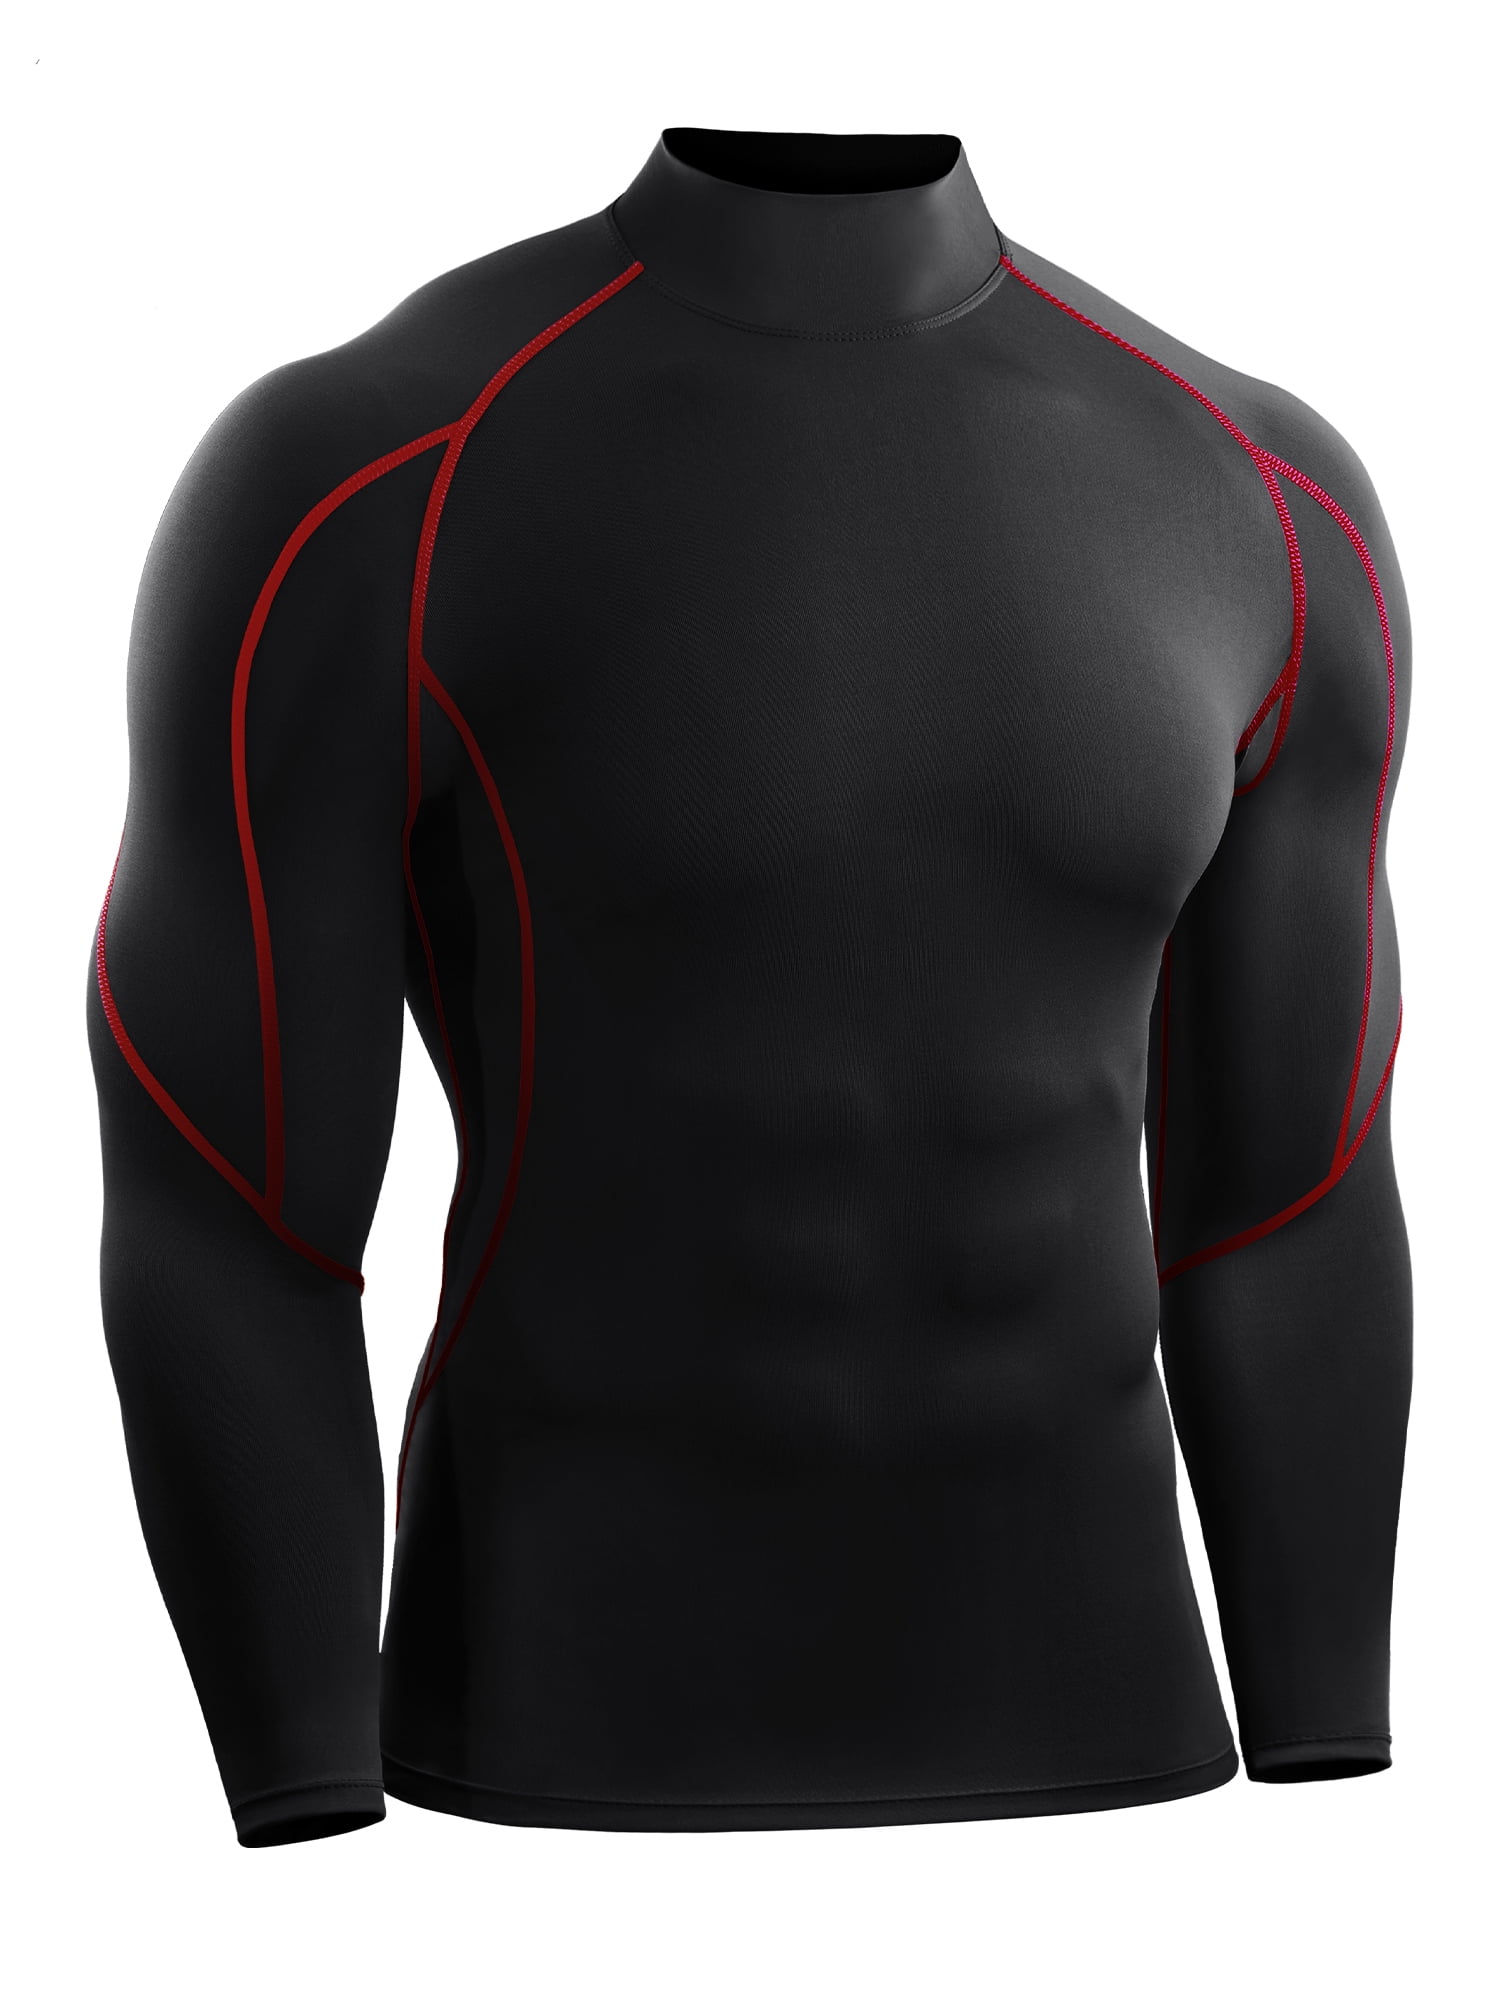 Men Compression Armour Base Layer Long Sleeve Tops Thermal Sports Gym T-shirt 